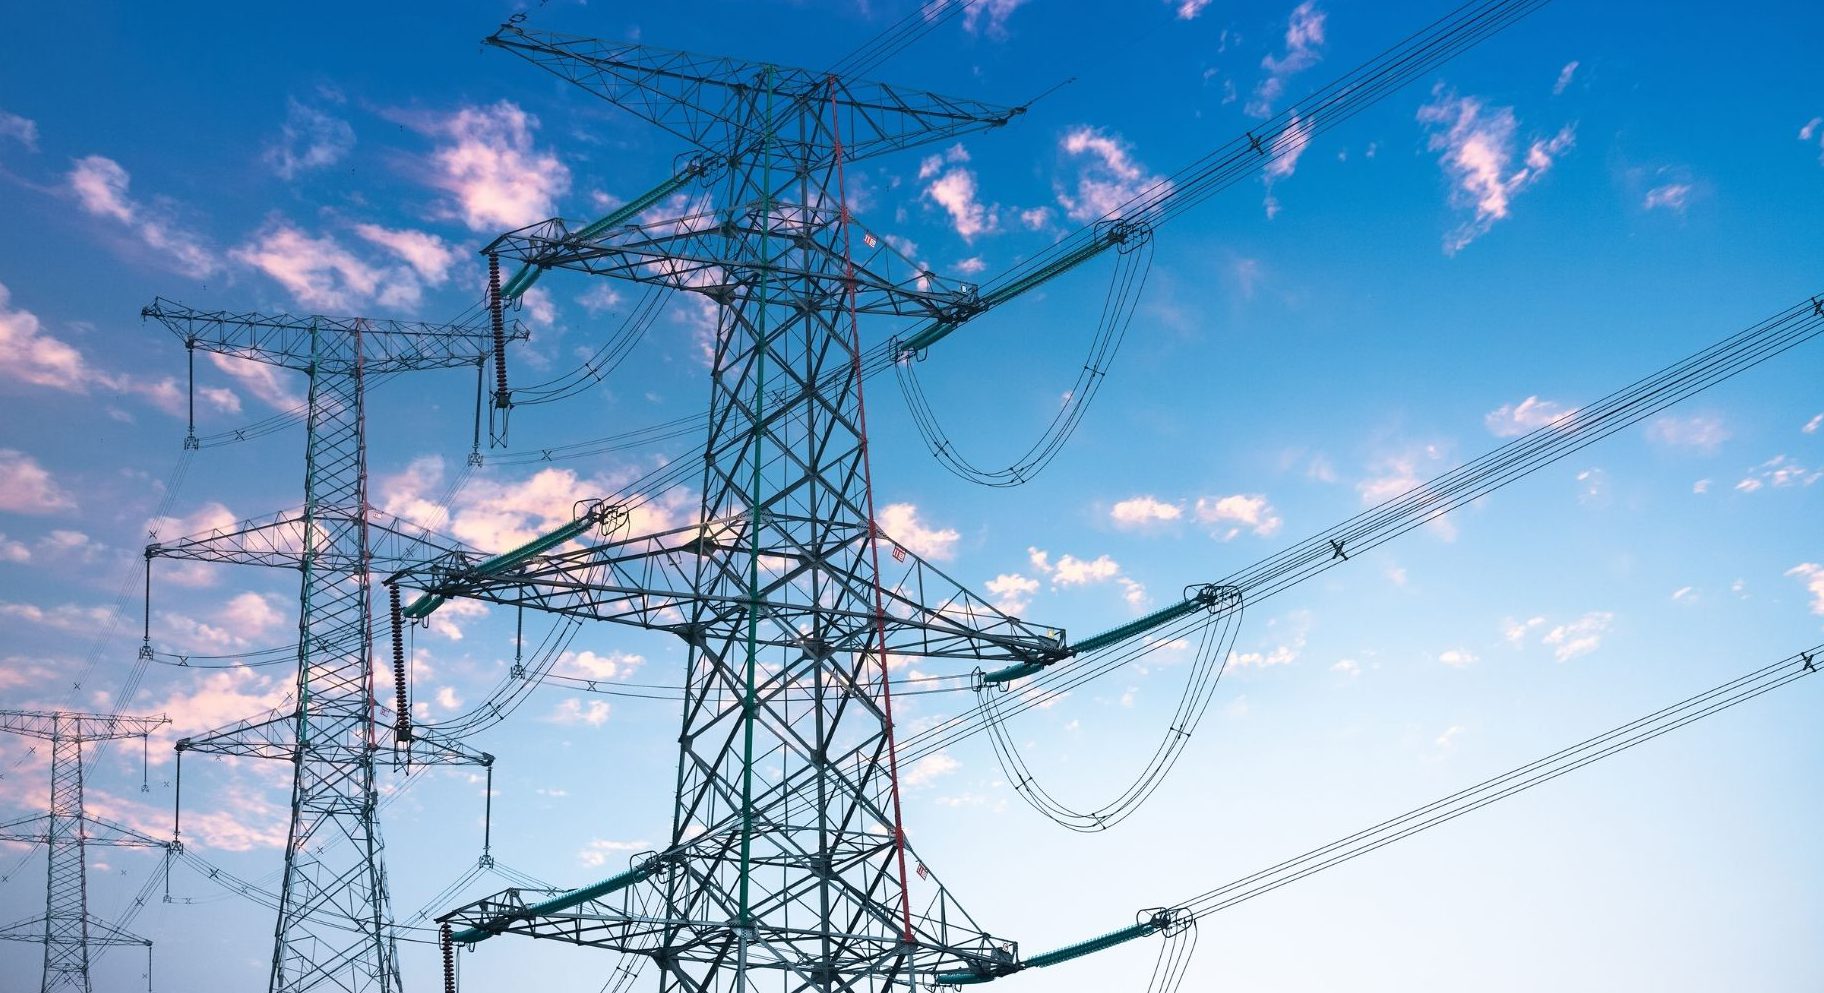 Take up Global Electric Power Transmission, Control, And Distribution Market Opportunities with clear Industry Data – Includes Electric Power Transmission, Control, And Distribution Market Size